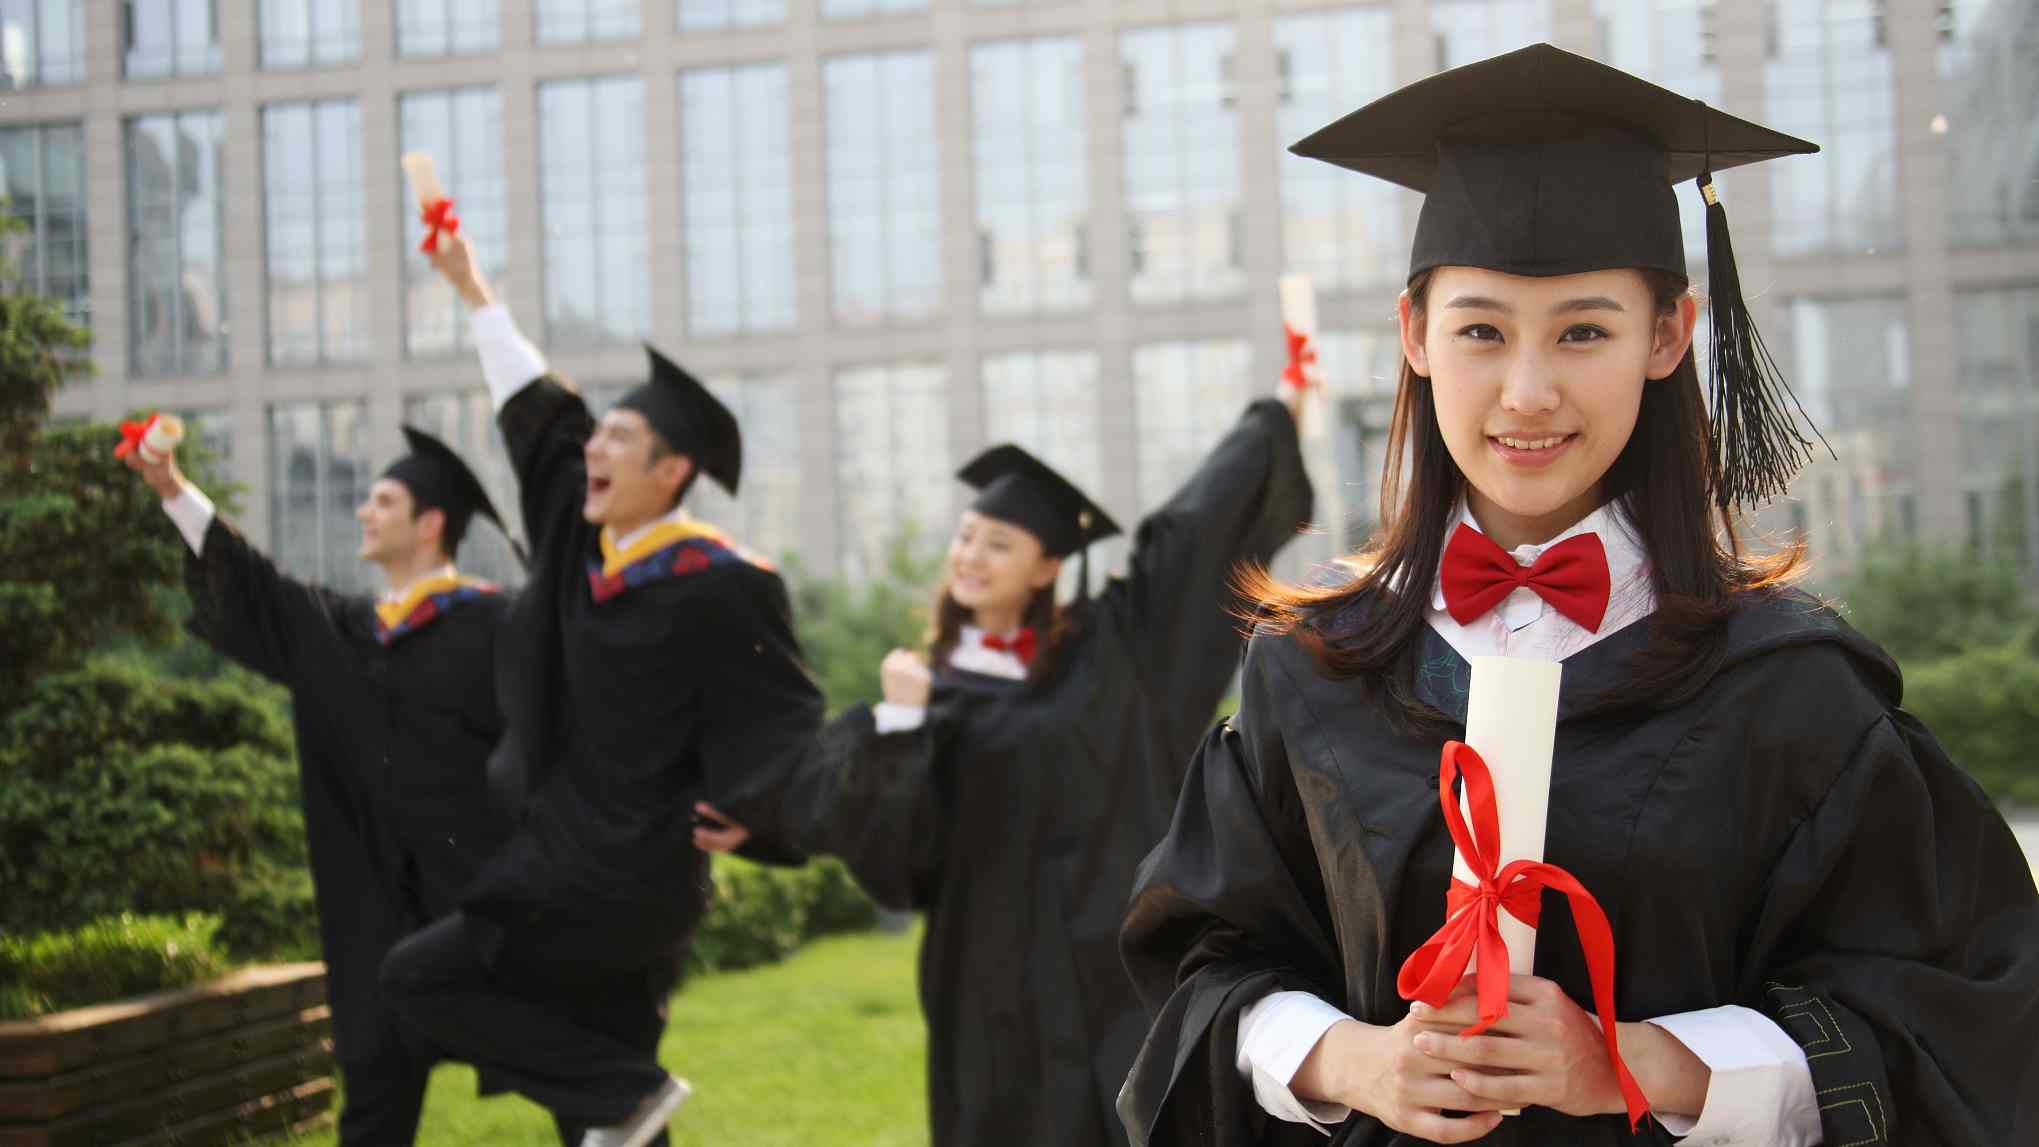 How Bad Is China’s Economy? Millions of Young People Are Unemployed and Disillusioned